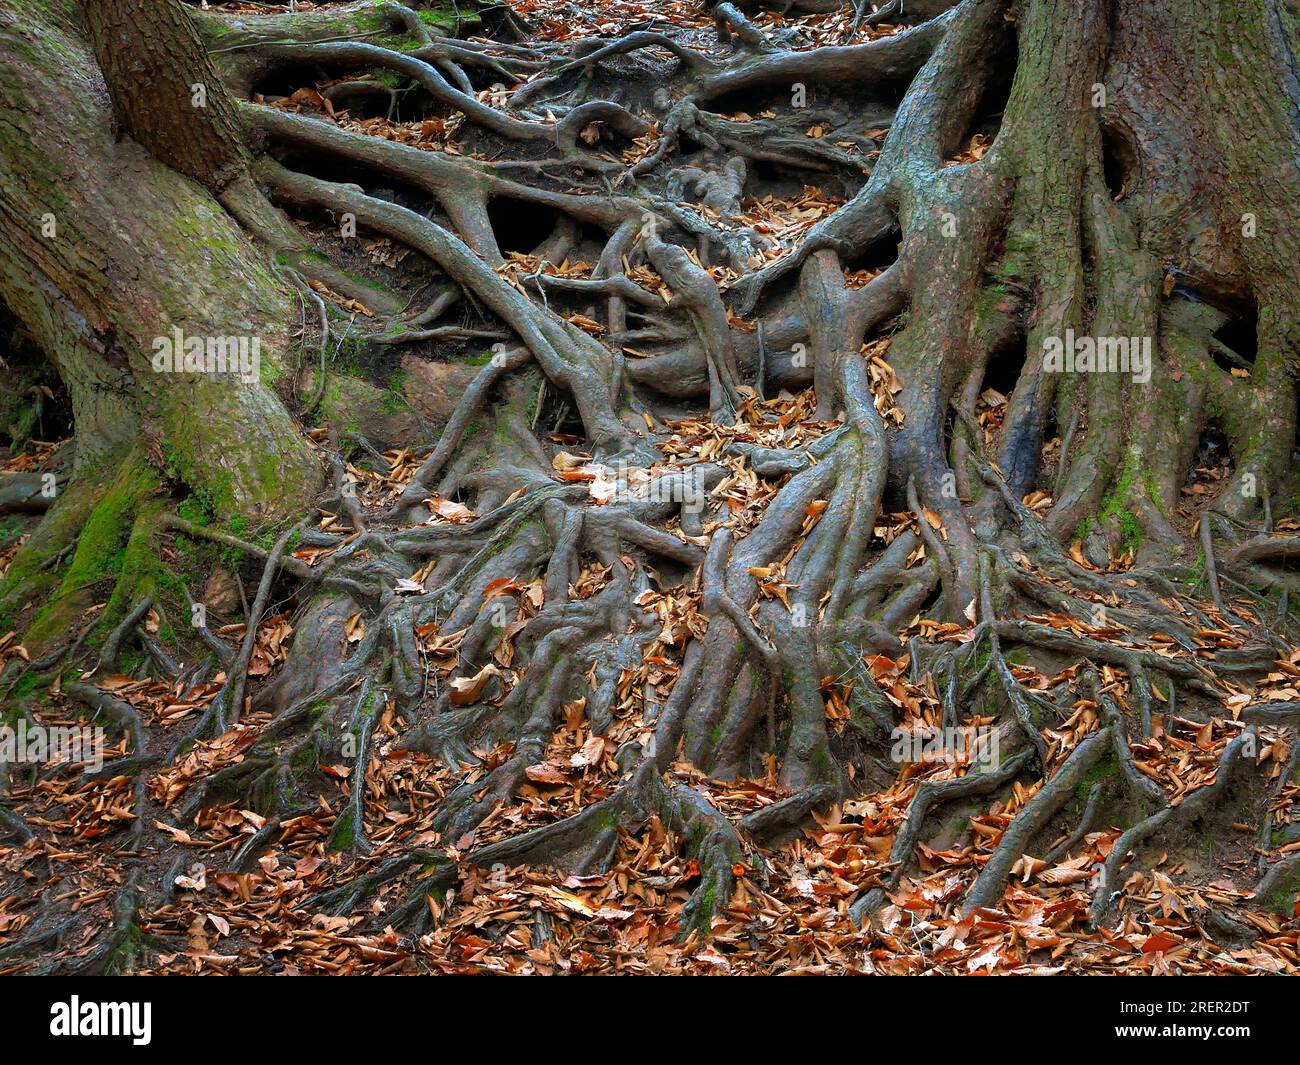 Fallen leaves among exposed tangle of tree roots along the trail in Ohio's Hocking Hills State Park. Stock Photo